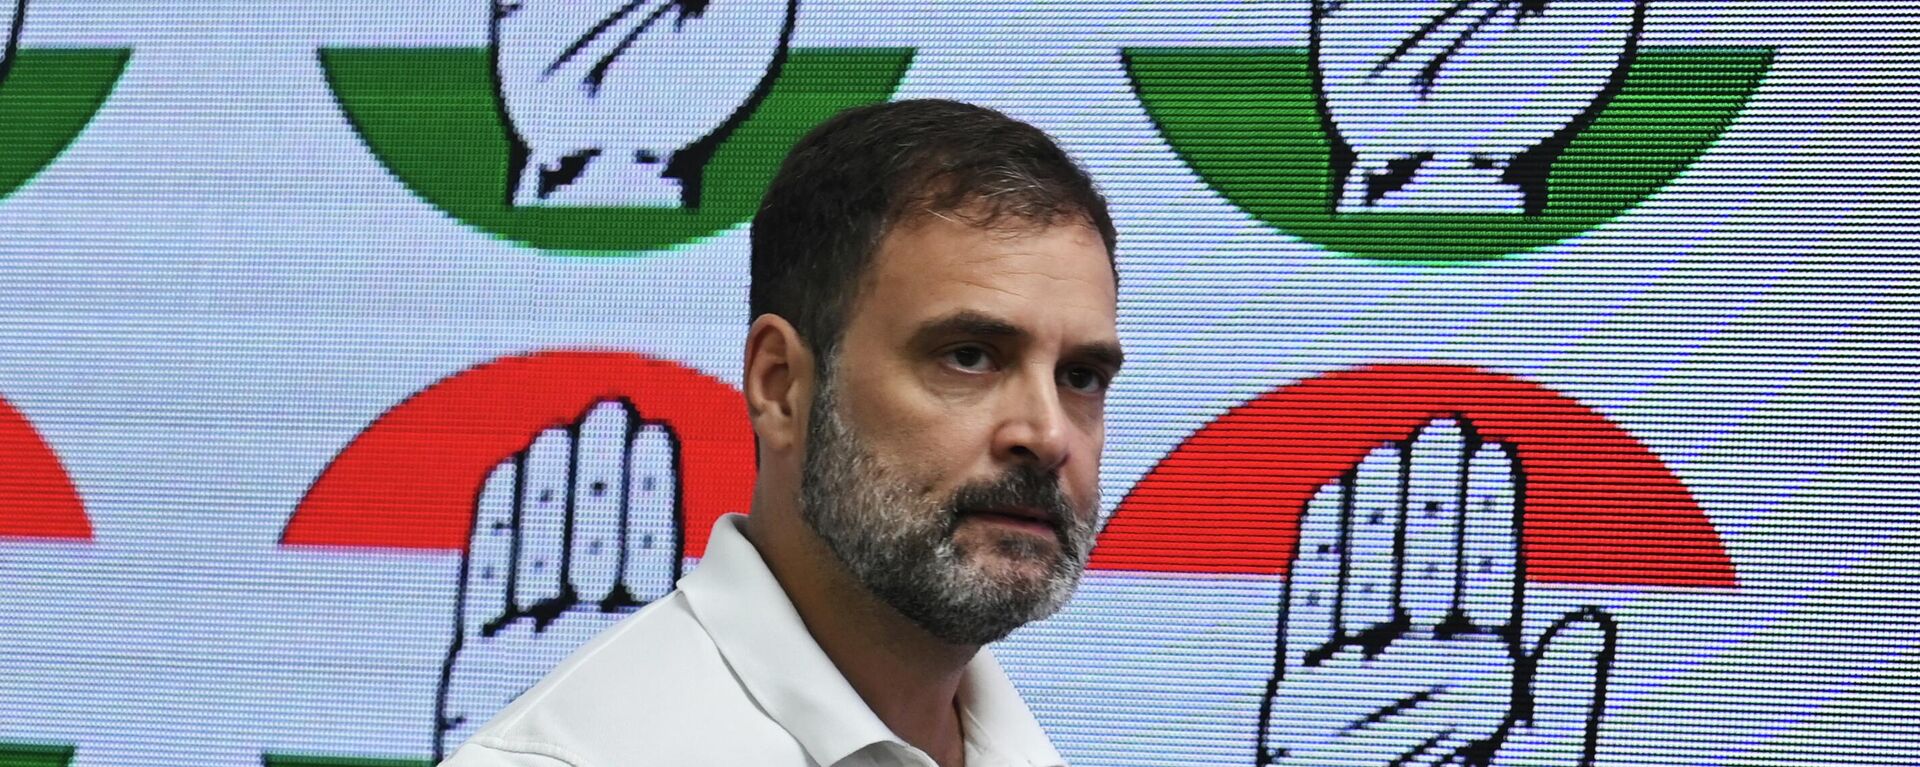 In this file photo taken on August 4, 2023, India's Congress party leader Rahul Gandhi arrives for a media briefing at the party headquarters in New Delhi, after the Supreme Court suspended his defamation conviction. India's main opposition leader Rahul Gandhi was restored to parliament on August 7 after the country's Supreme Court last week suspended his defamation conviction over his political comments on Prime Minister Narendra Modi. The 53-year-old Congress party leader was sentenced to two years' imprisonment in March in a case that critics flagged as an effort to stifle political opposition in the world's largest democracy. - Sputnik भारत, 1920, 07.08.2023